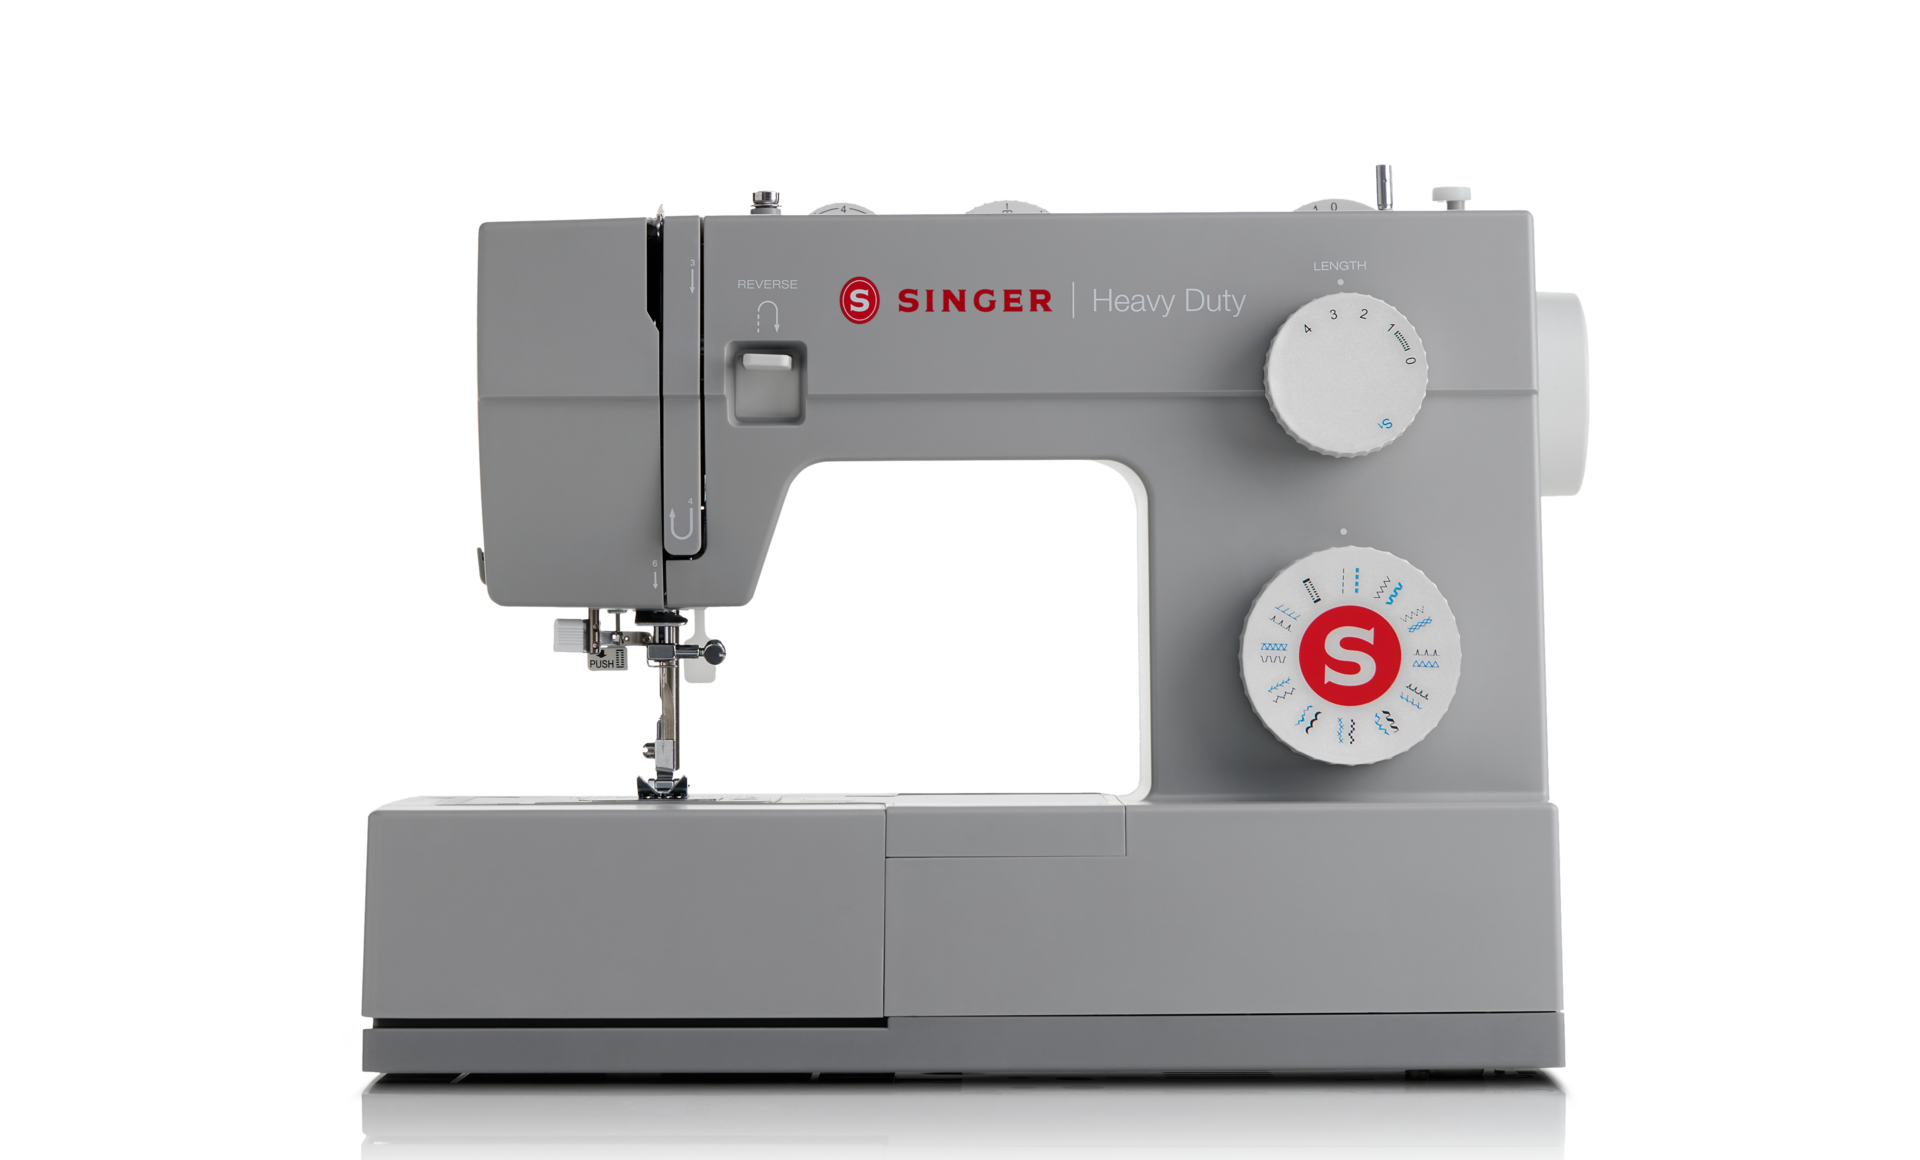 Singer® Heavy Duty 4423 Sewing Machine With 97 Stitch Applications